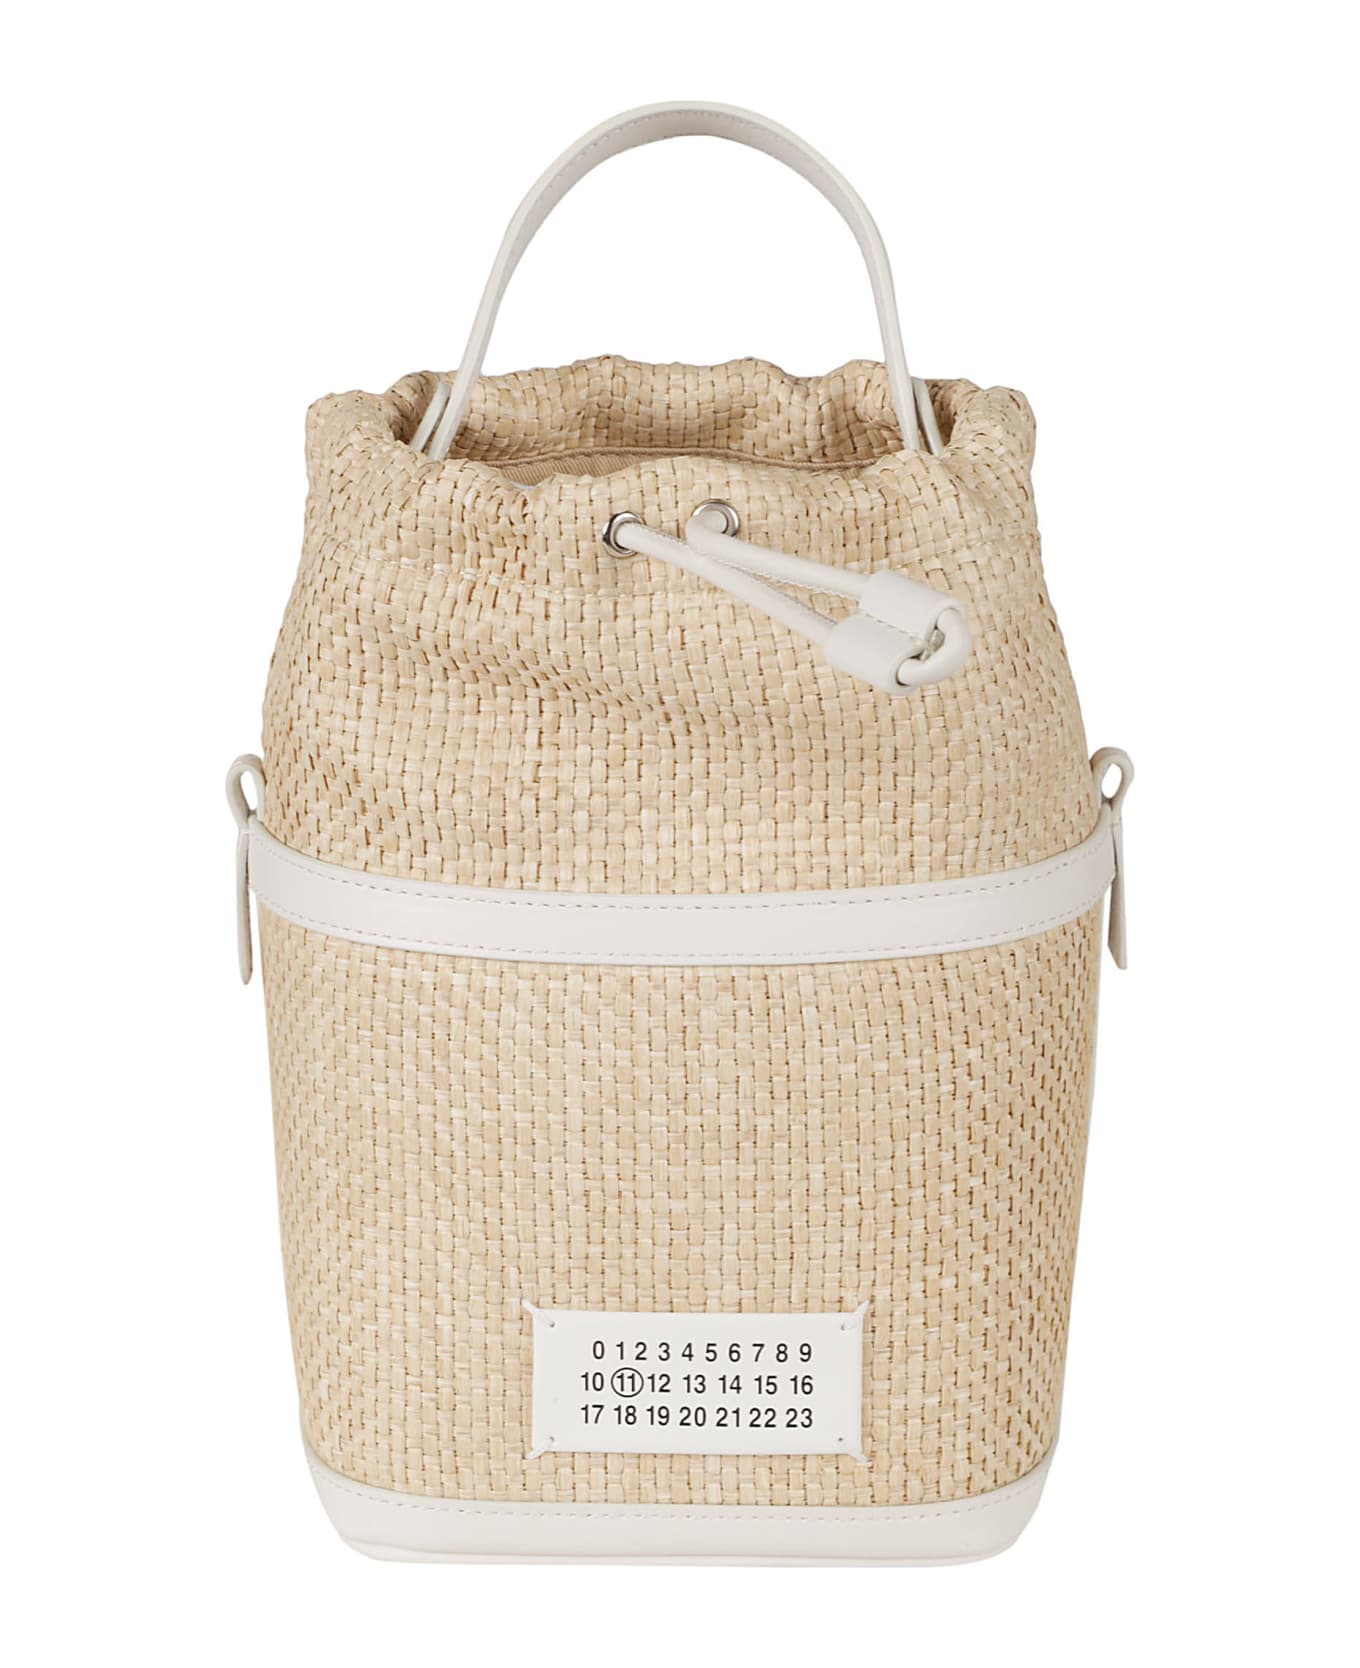 Maison Margiela Logo Patched Woven Bucket Bag - Natural/Dirty White